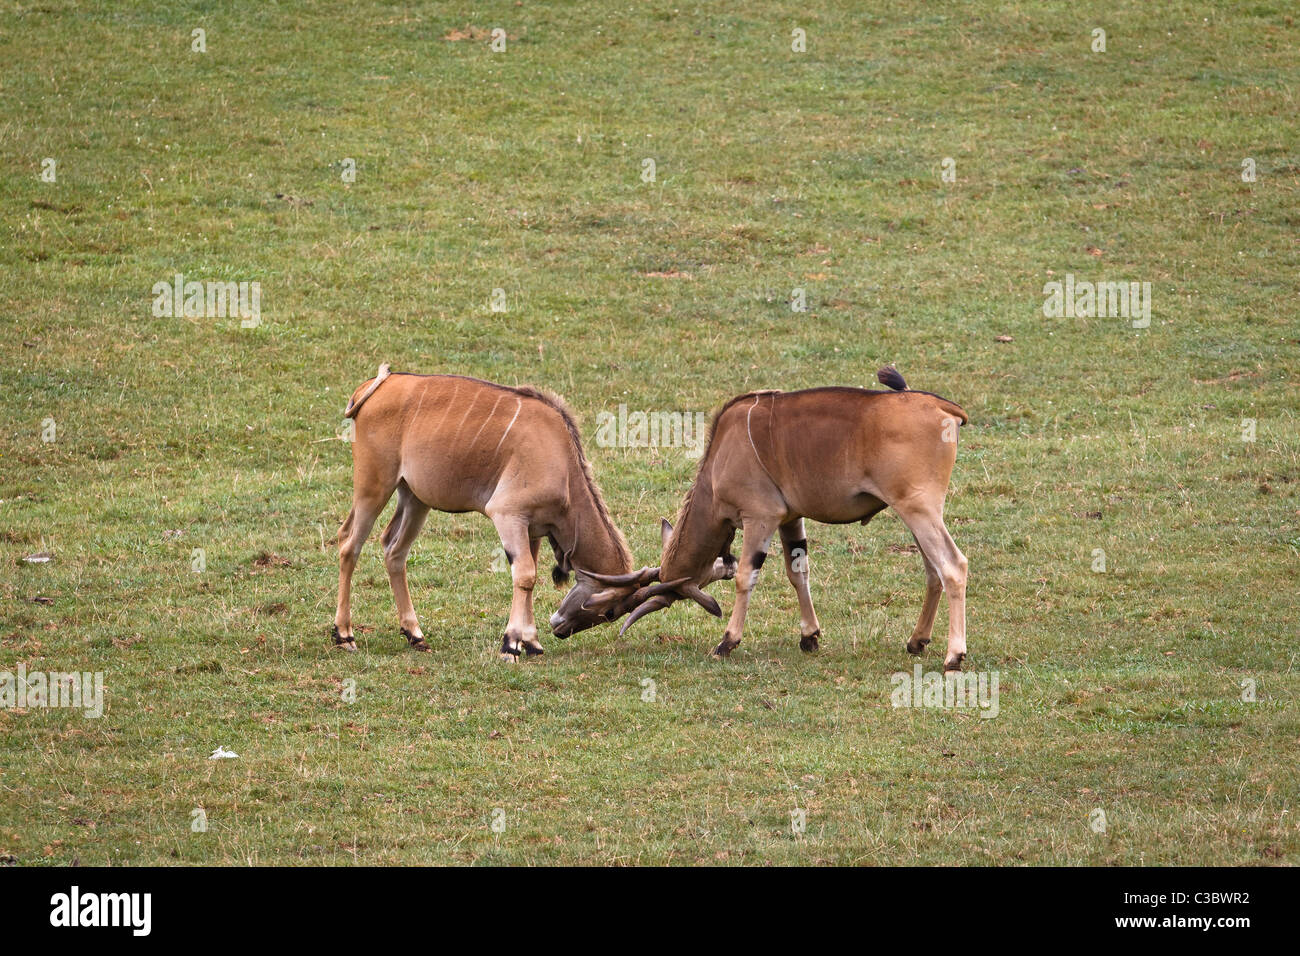 Two eland, taurotragus oryx fighting in a wild life park Stock Photo